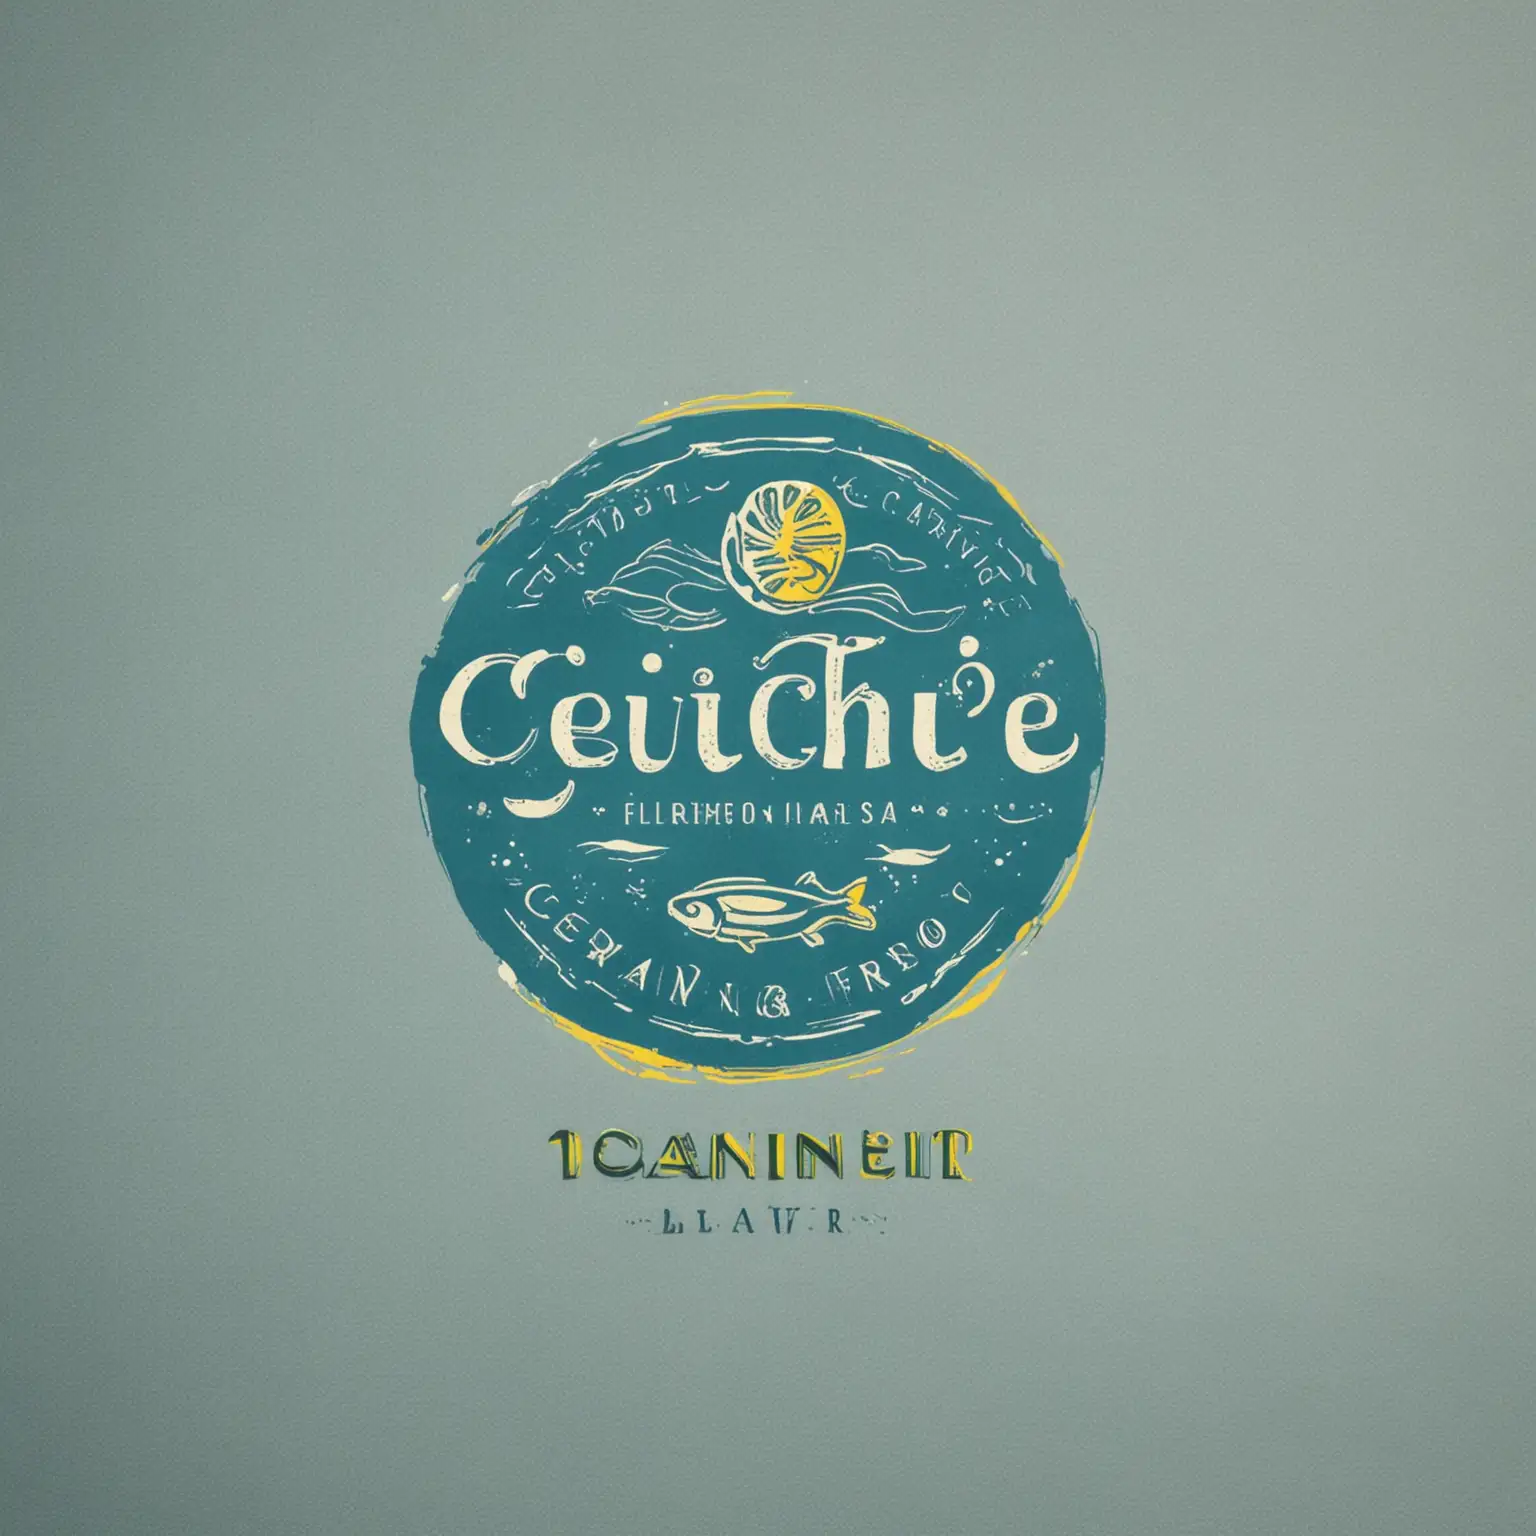 Elegant Seafood Catering Logo with Minimalist Design and Fresh Citrus Accents